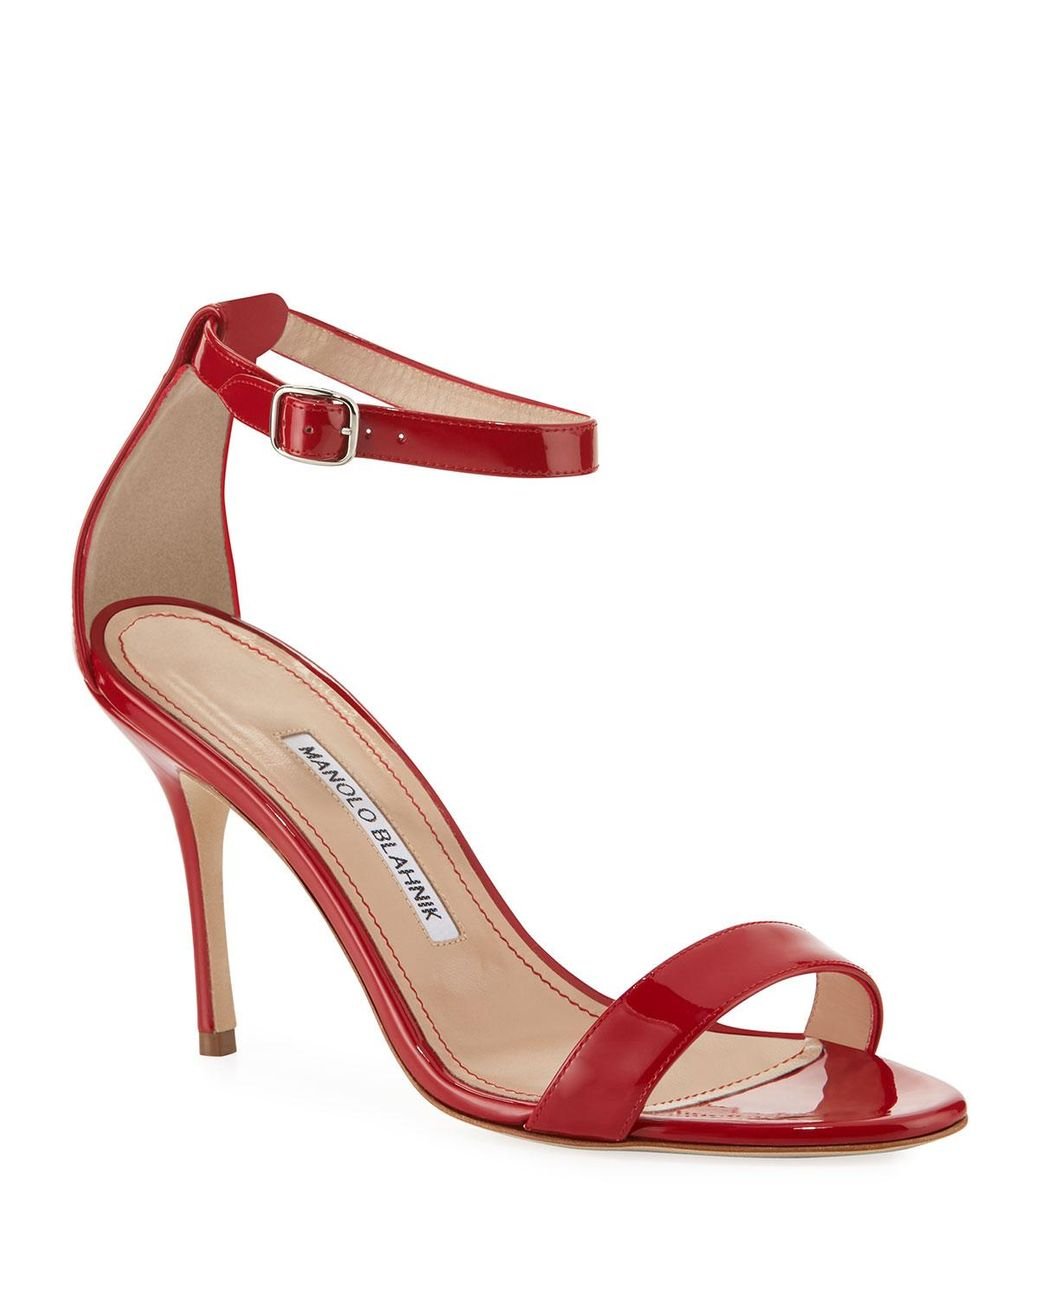 Manolo Blahnik Leather Chaos Patent Ankle-strap Sandals in Red - Lyst